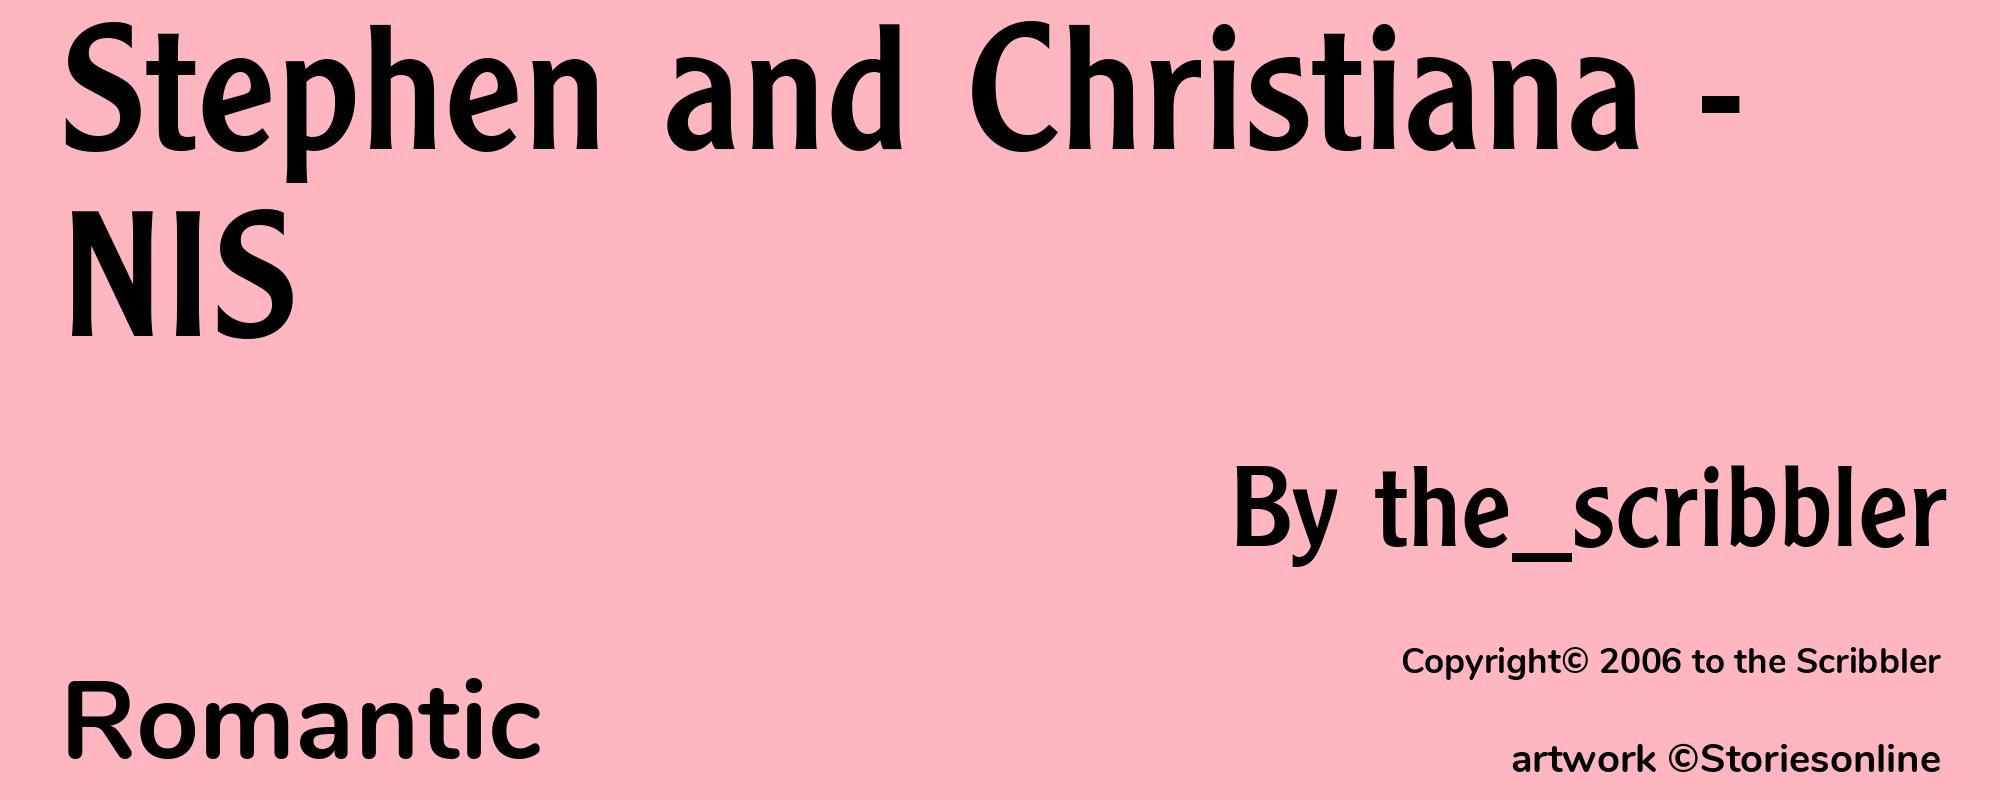 Stephen and Christiana - NIS - Cover